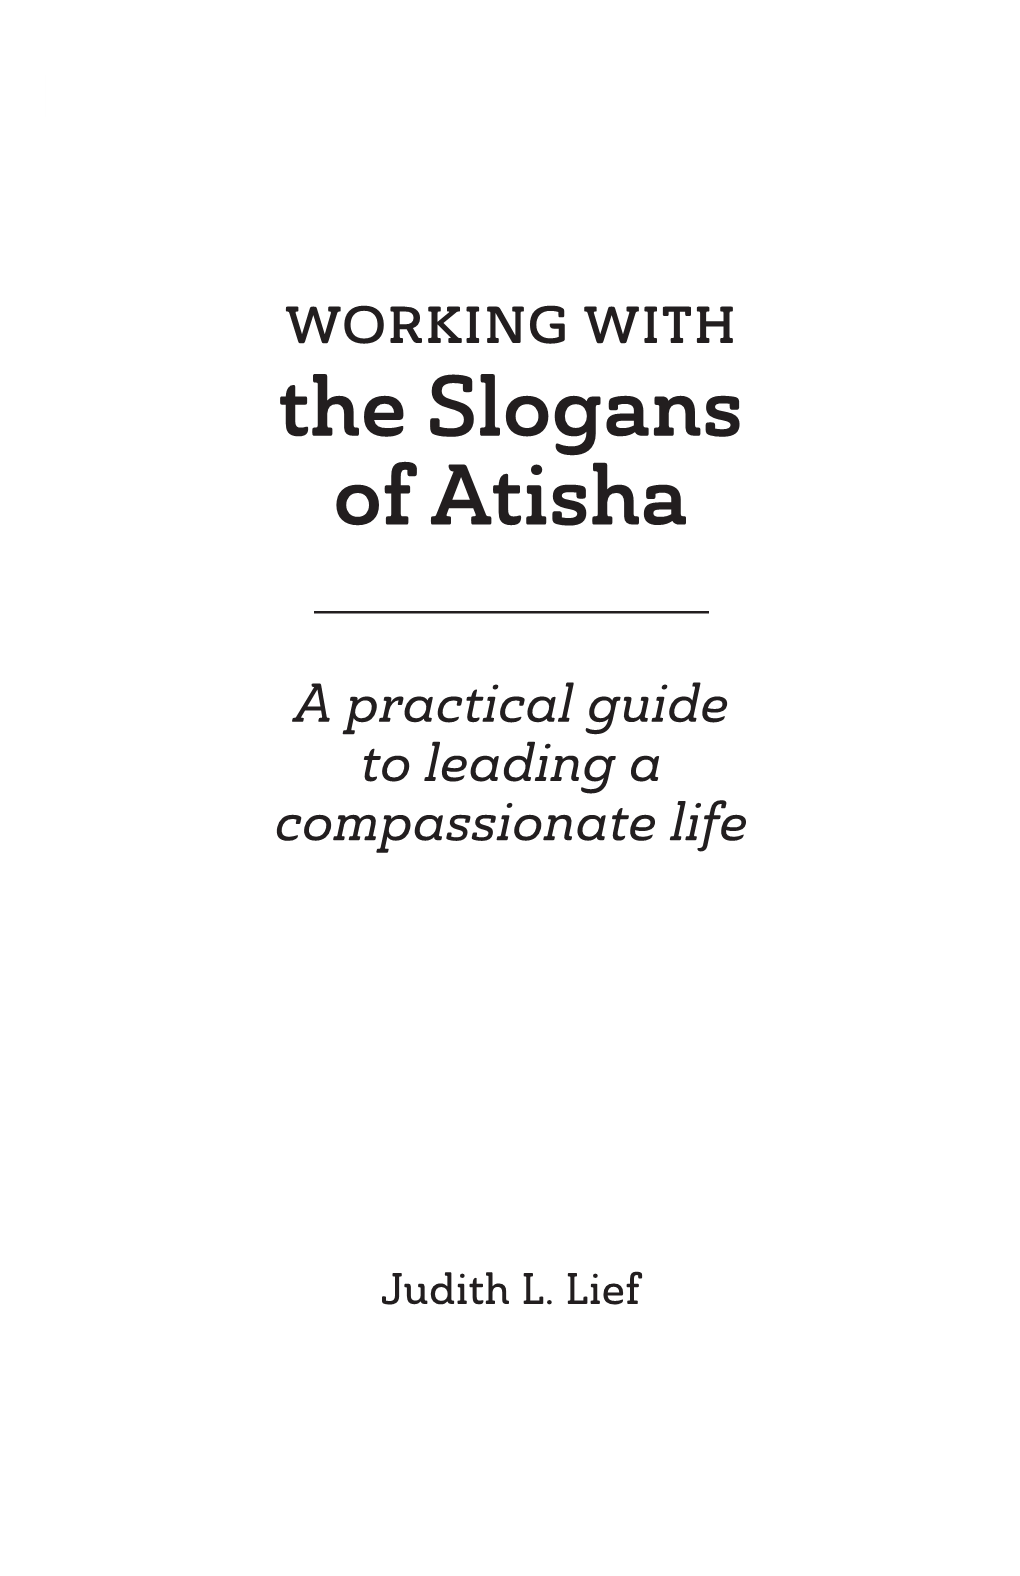 Working with the Slogans of Atisha